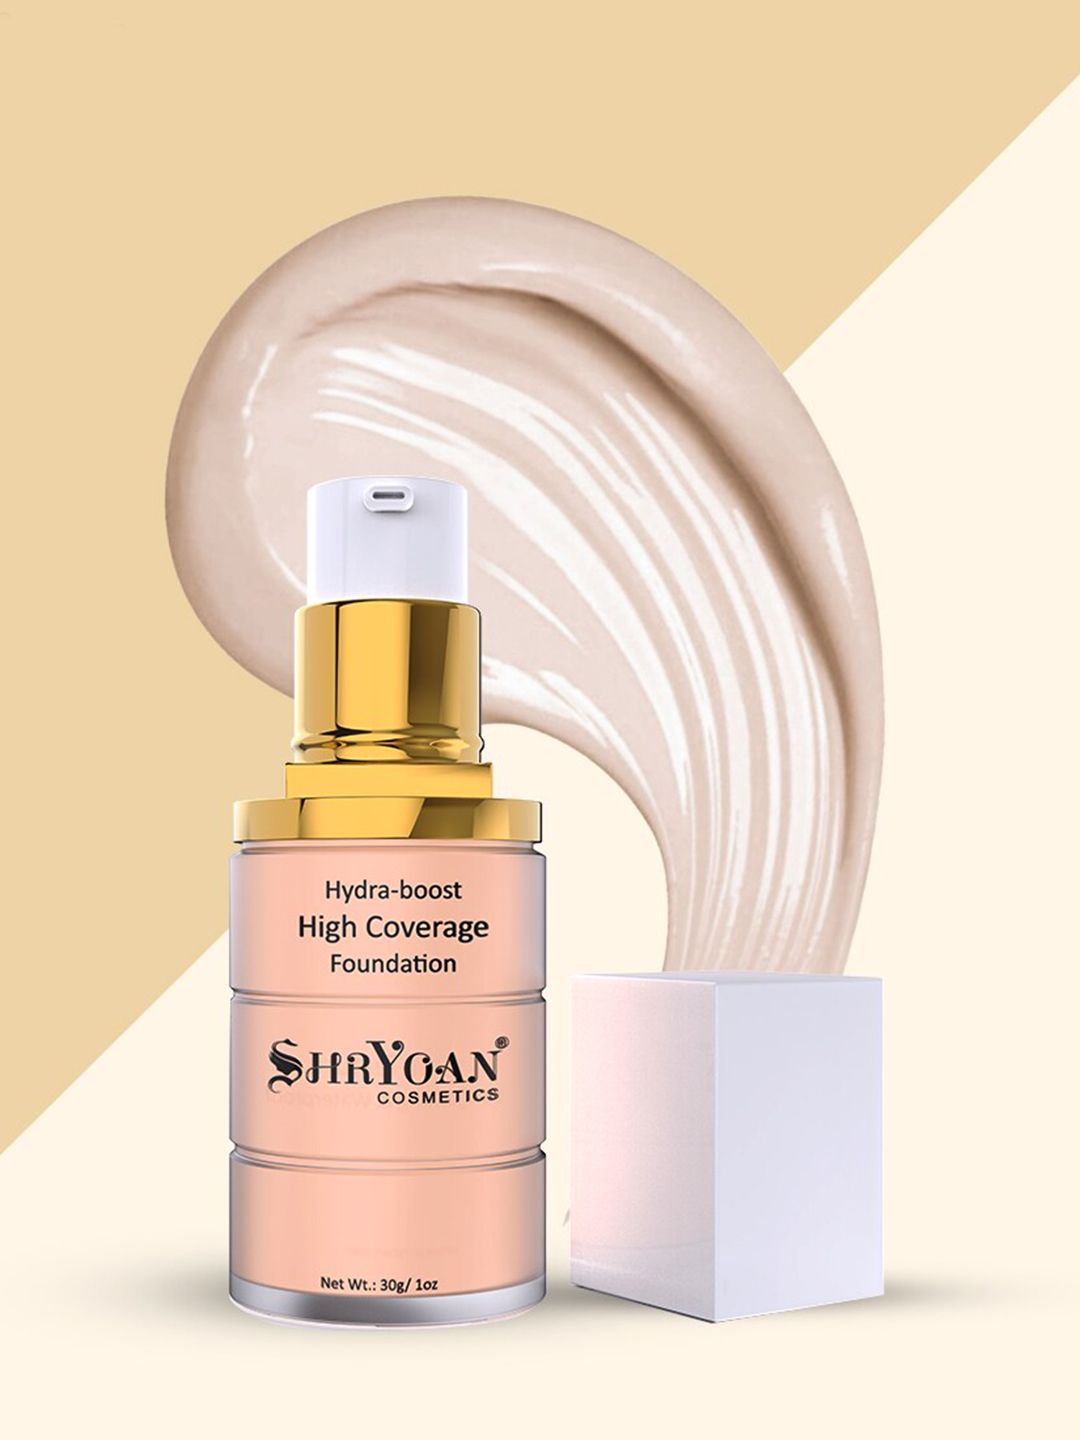 SHRYOAN Hydra-boost High Coverage Foundation Price in India